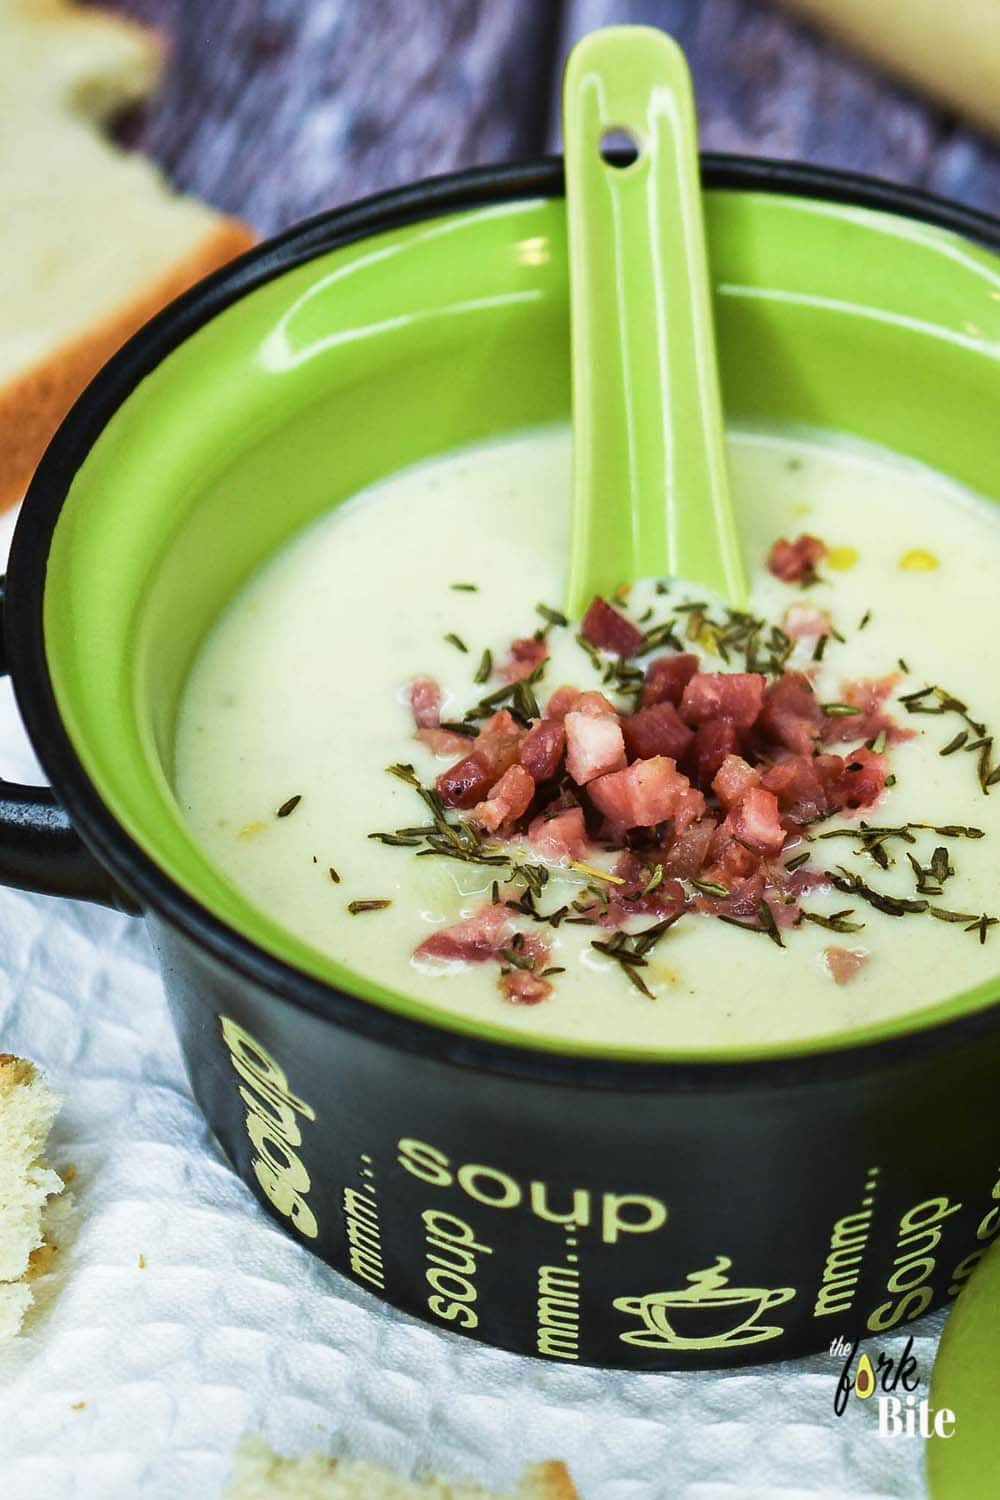 This ham potato and corn chowder soup is so delicious you won’t have much left for later. You might even find your family wants it two days in a row!